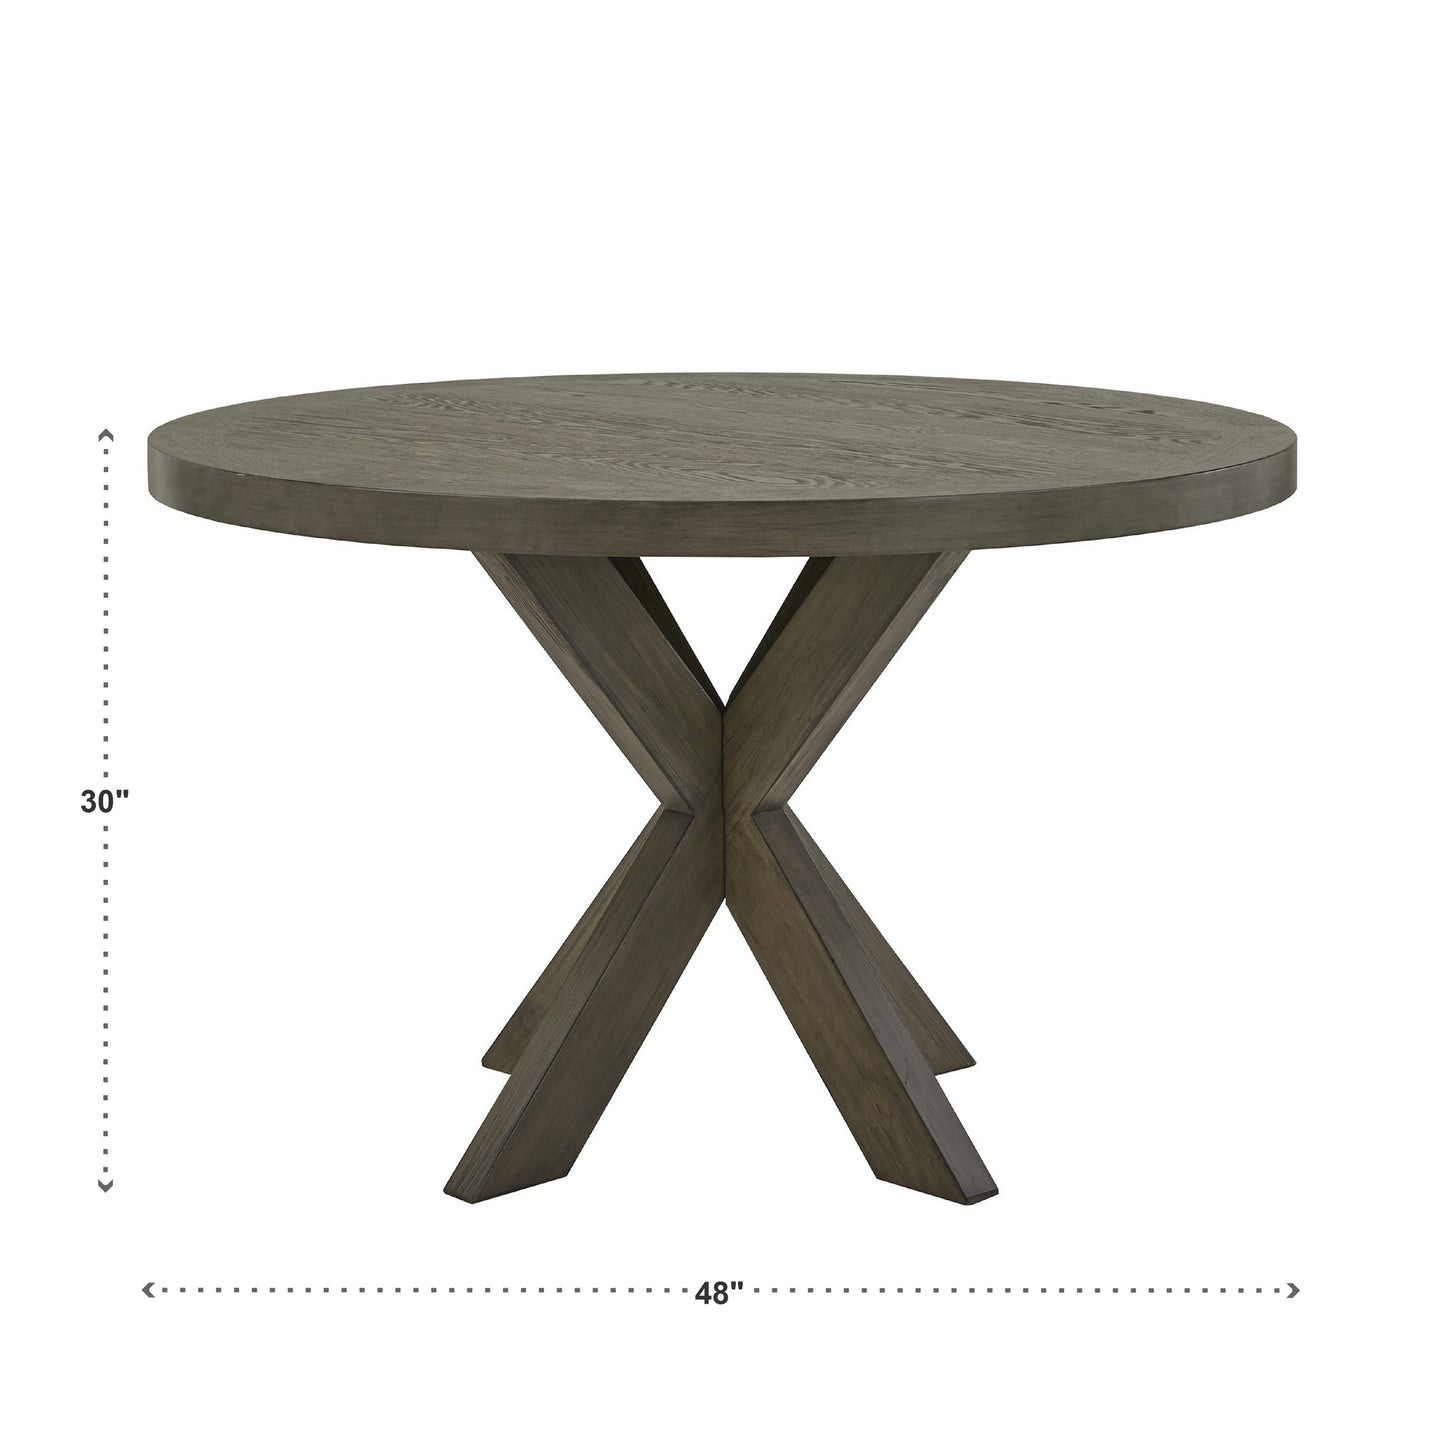 Weathered Wood Finish Table with Cross Base - Grey, 48" Round Dining Table